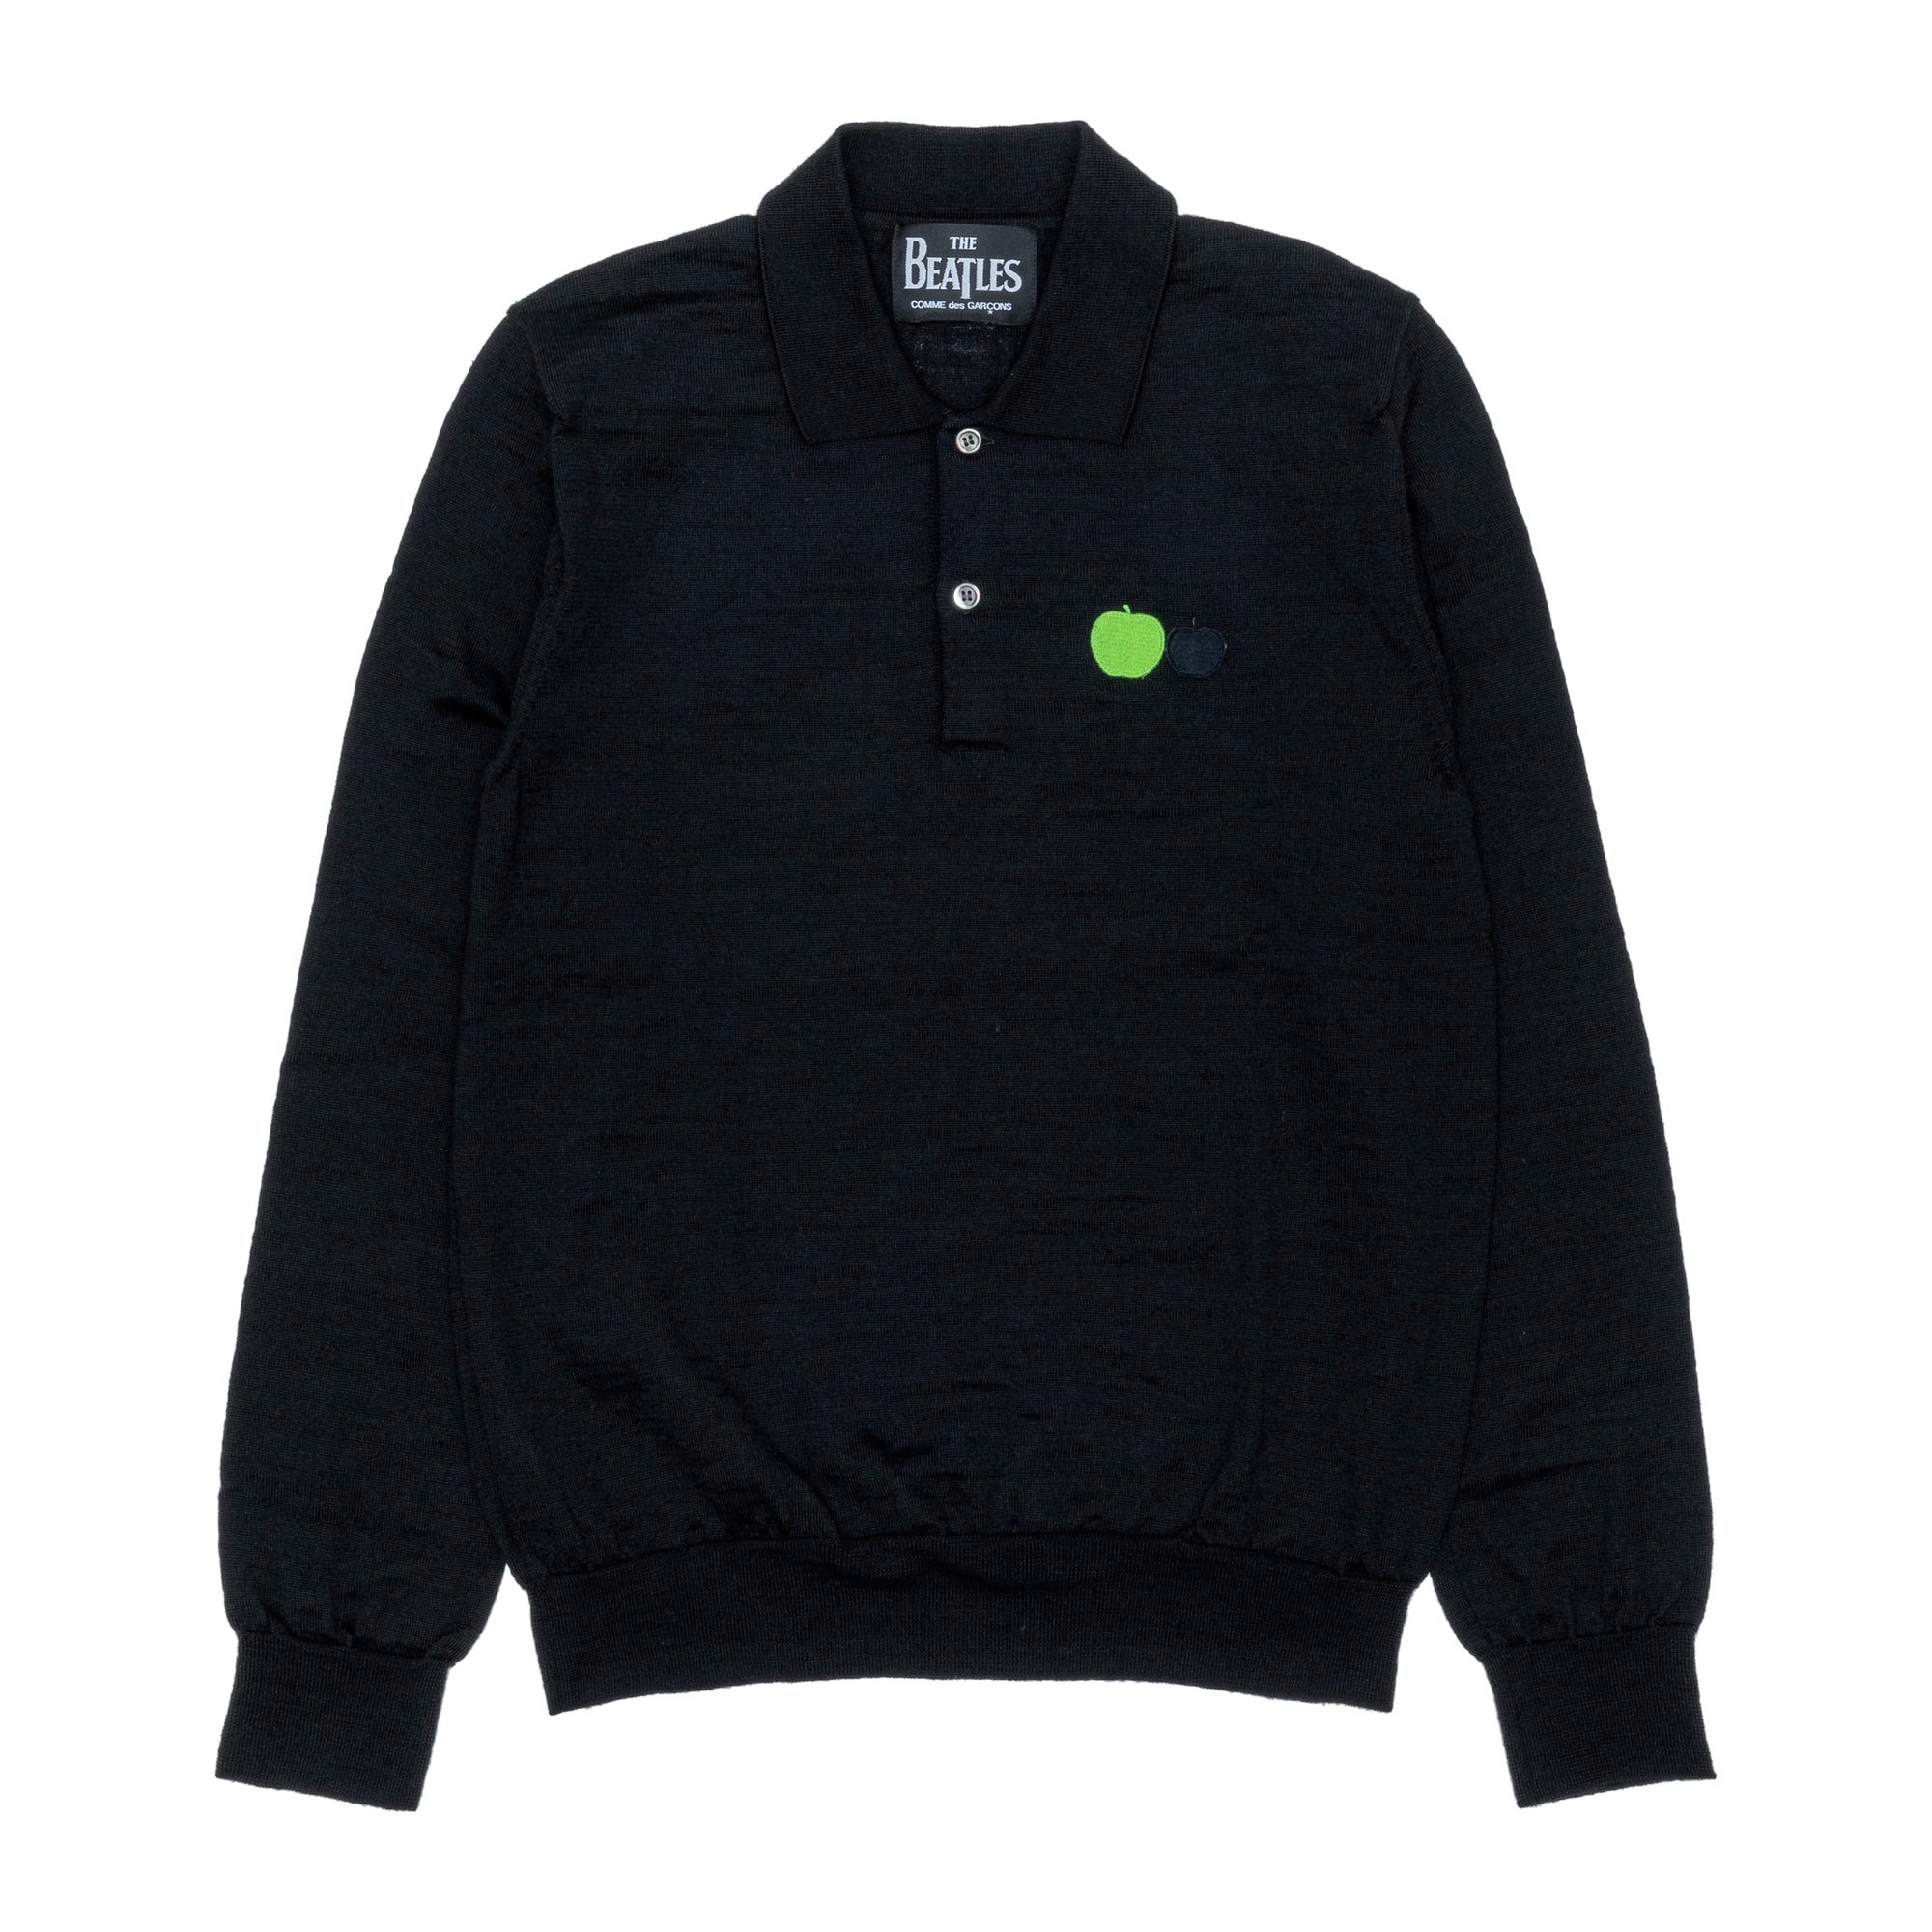 THE BEATLES CDG - One Point Knit Polo - (Black) view 1